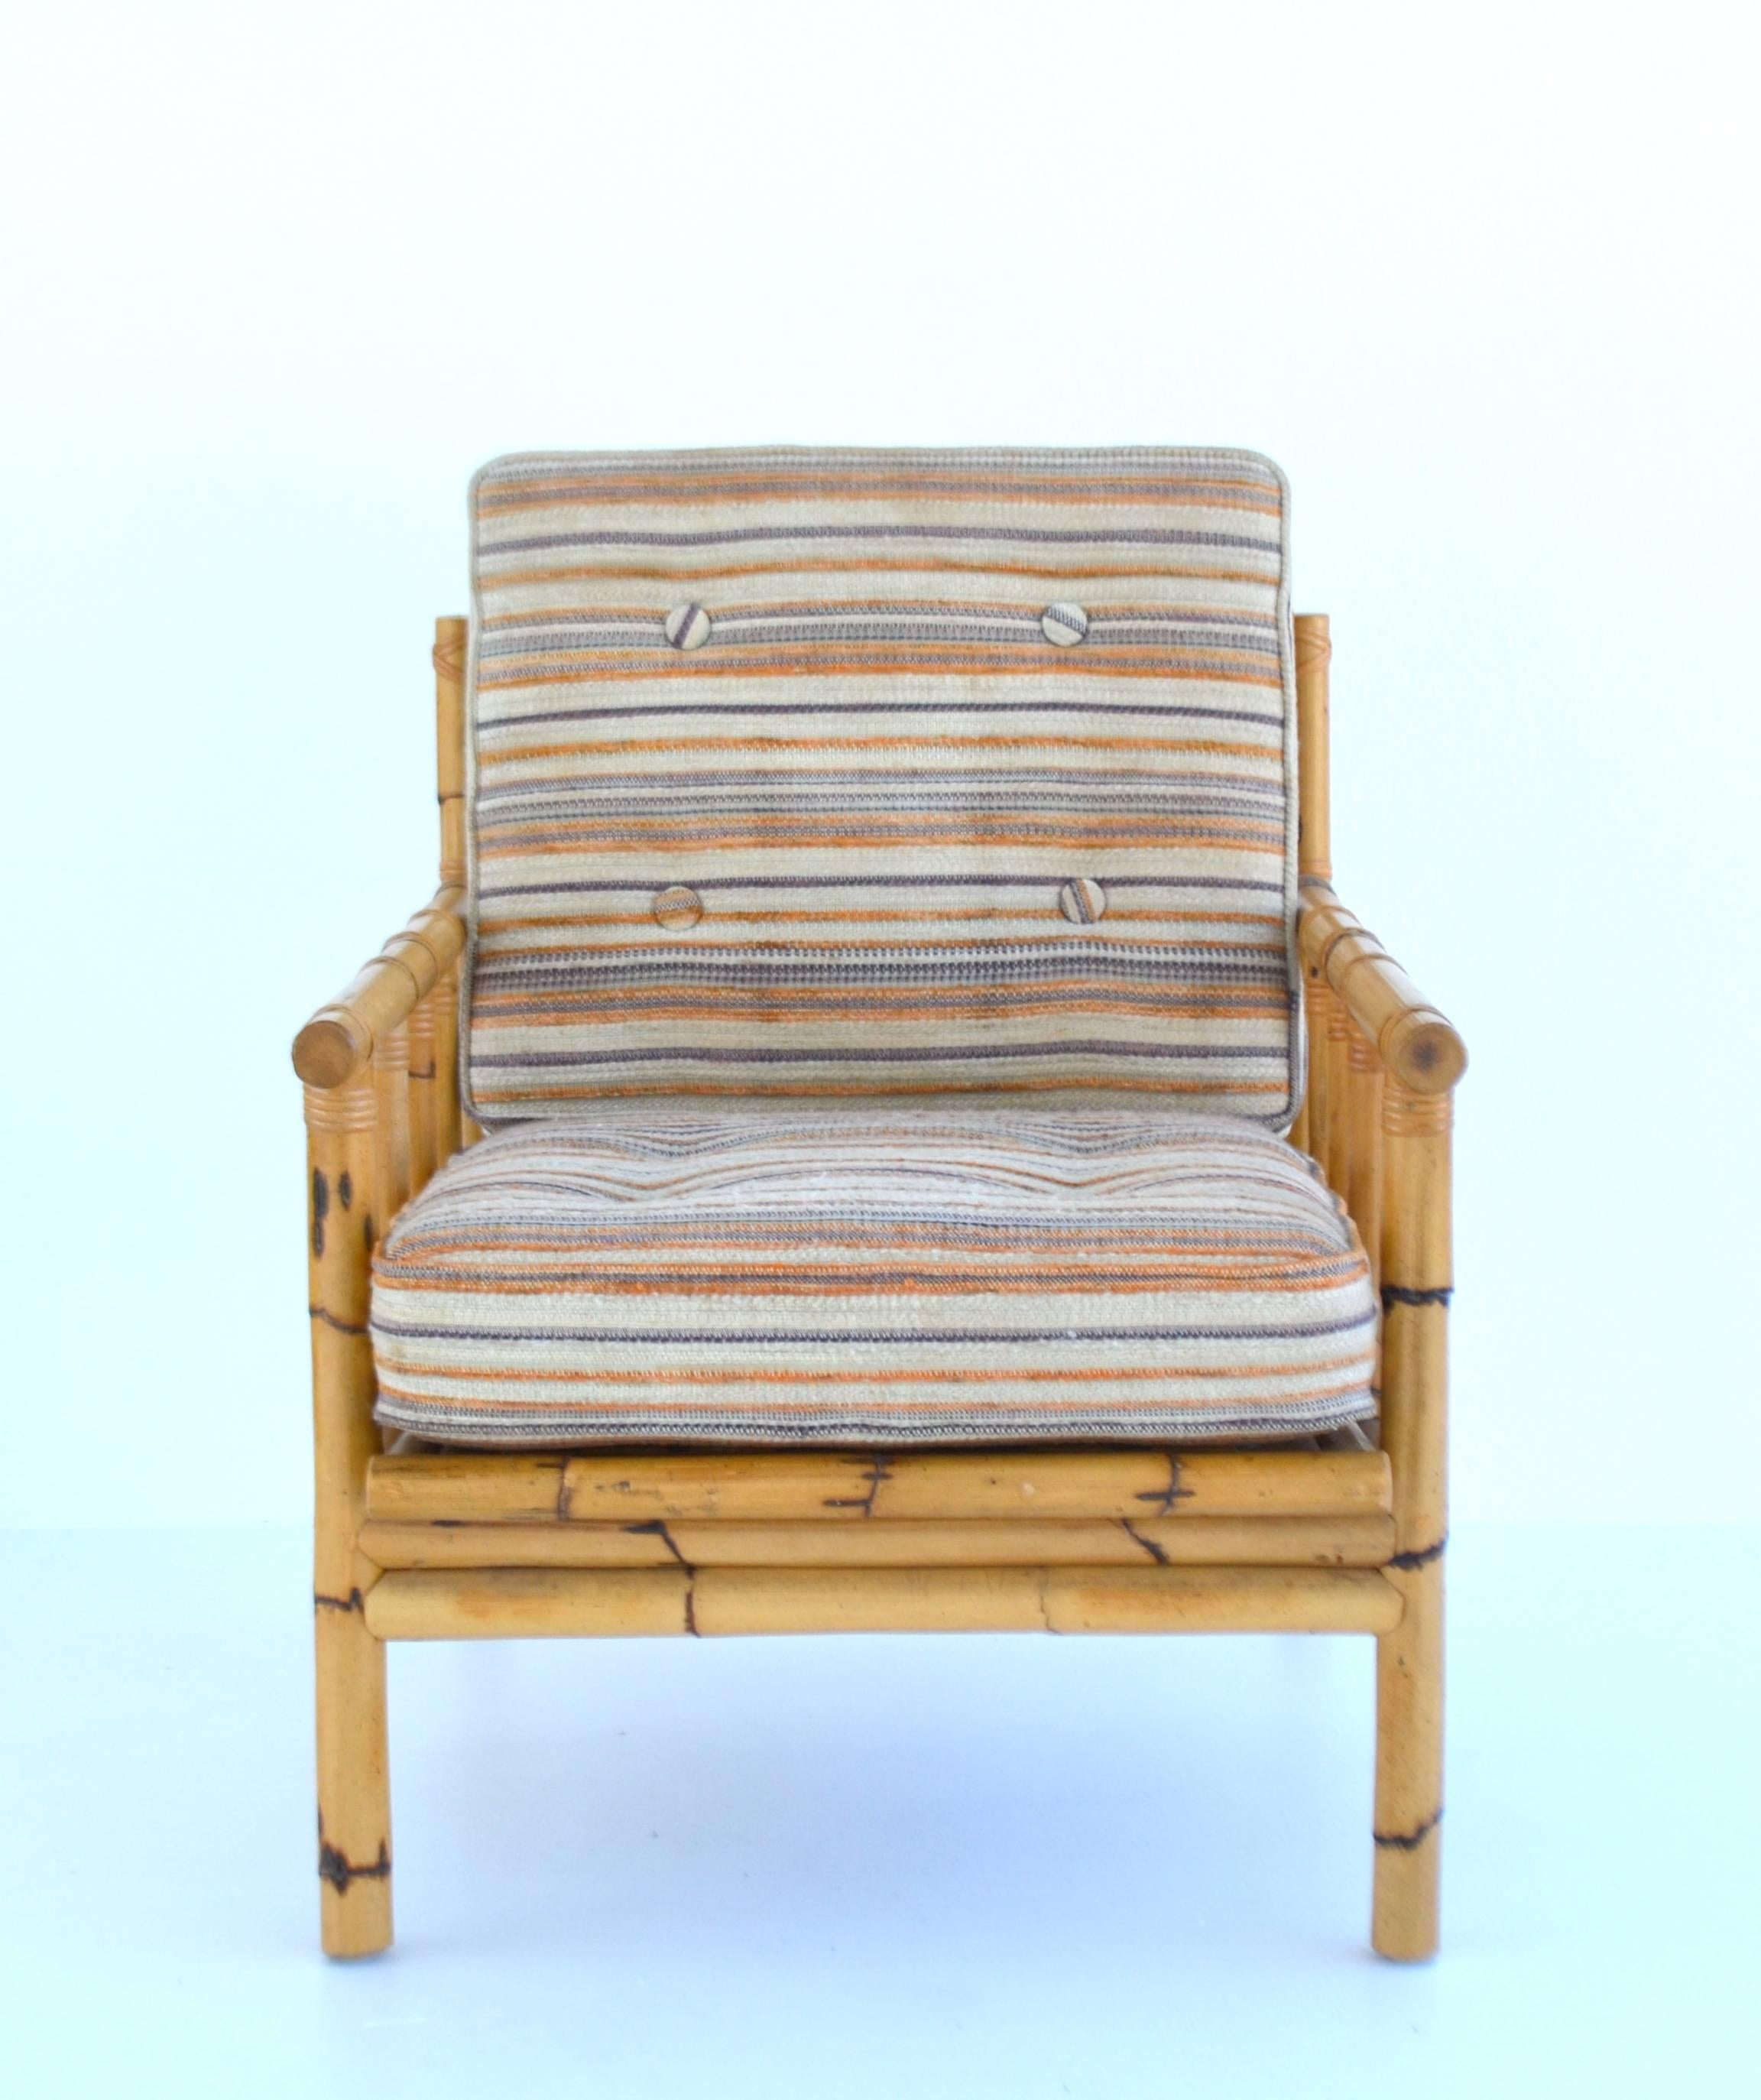 Striking midcentury bamboo framed club chair, circa 1950s-1960s. This custom lounge chair is upholstered with seat and back cushions in a cotton linen striped button-tufted fabric.
Measures:
Overall 25.5